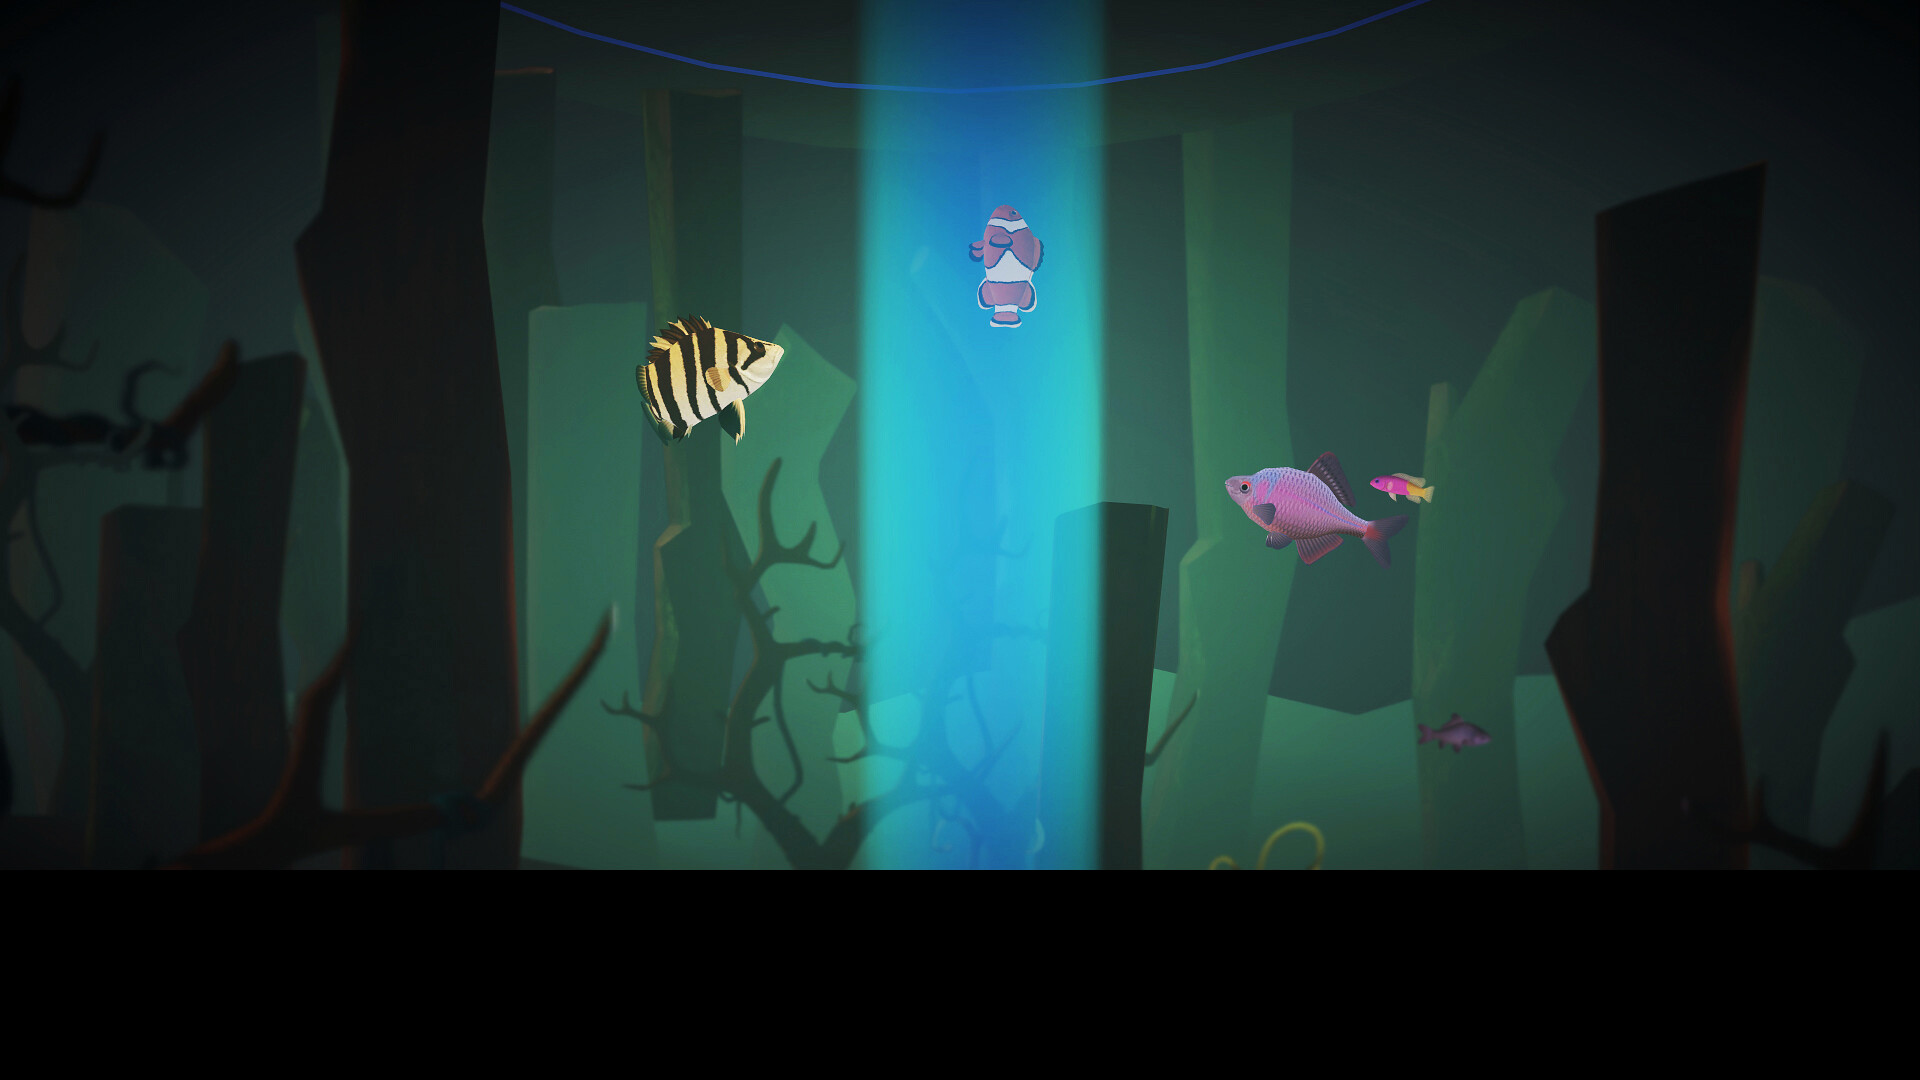 Save 70% on I Am Fish on Steam